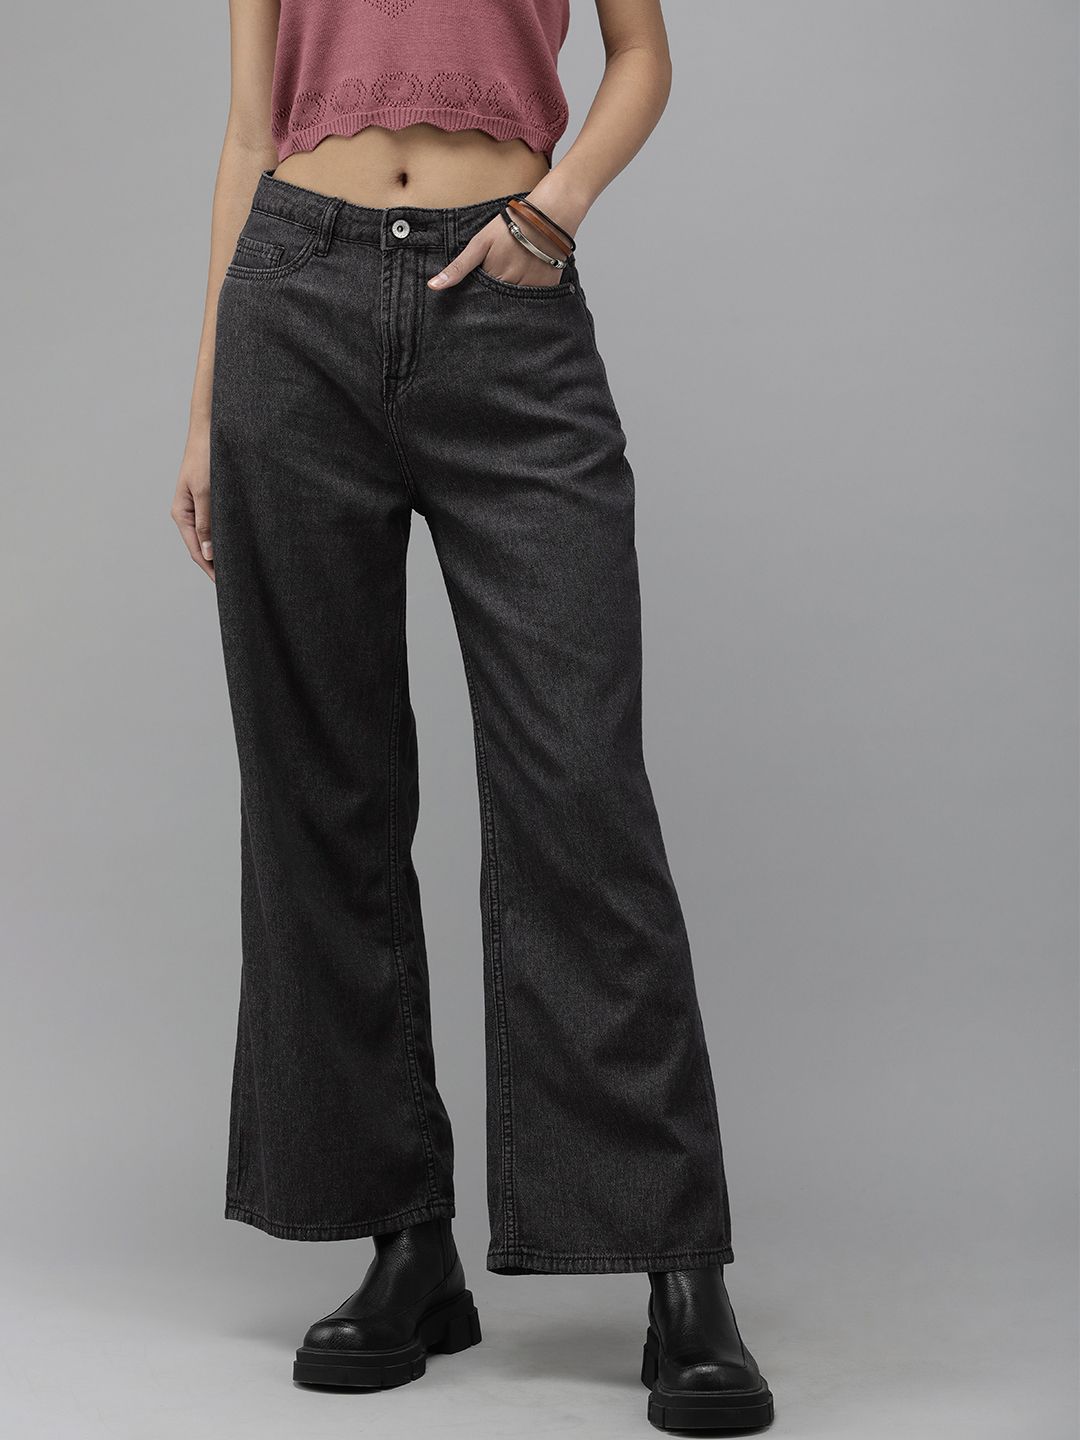 The Roadster Lifestyle Co. Women Black Light Fade Flared Stretchable Jeans Price in India